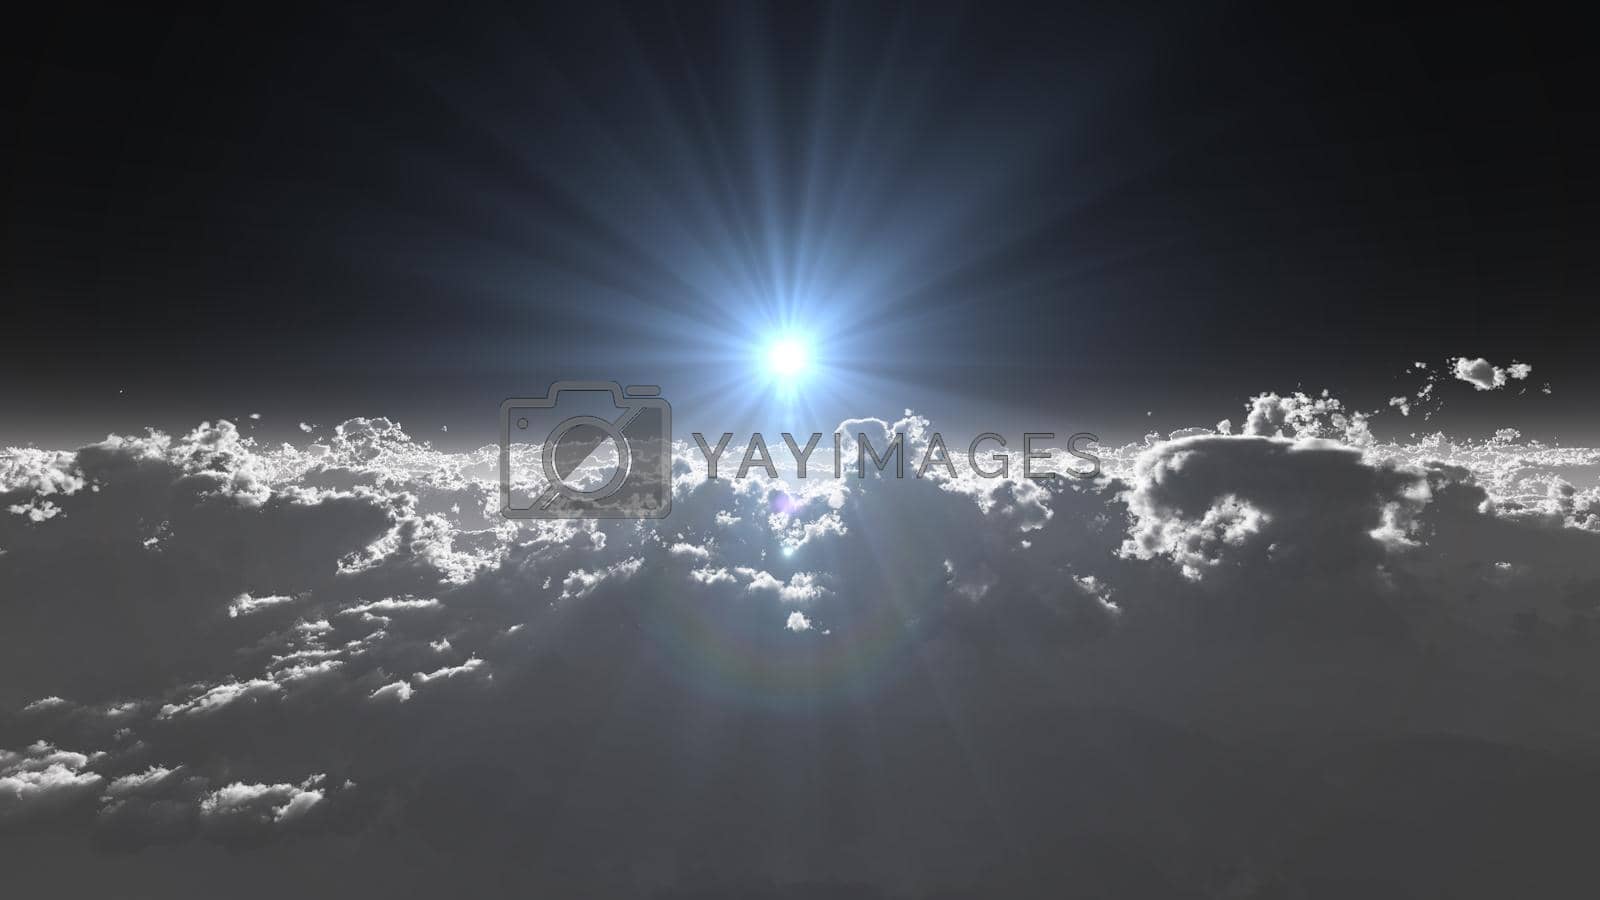 Royalty free image of high stratosphere above clouds, 3d render illustration by alex_nako